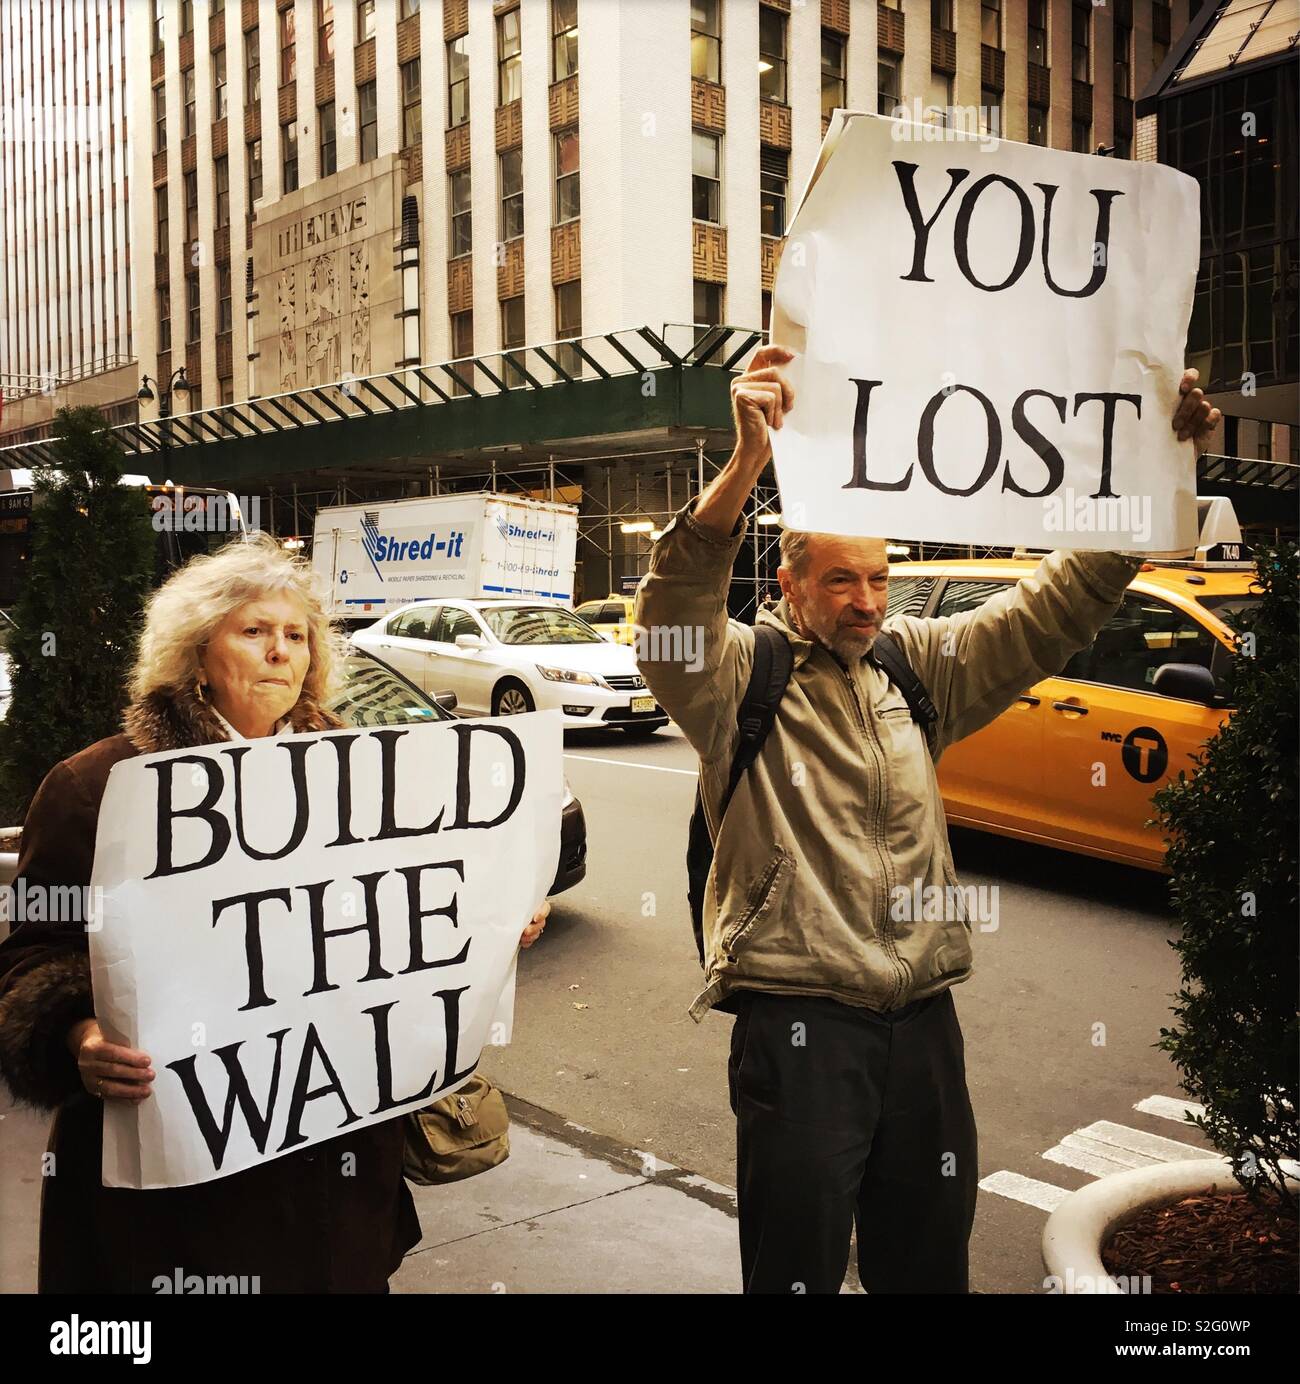 Trump supporters holding signs to build the wall, NYC. Stock Photo